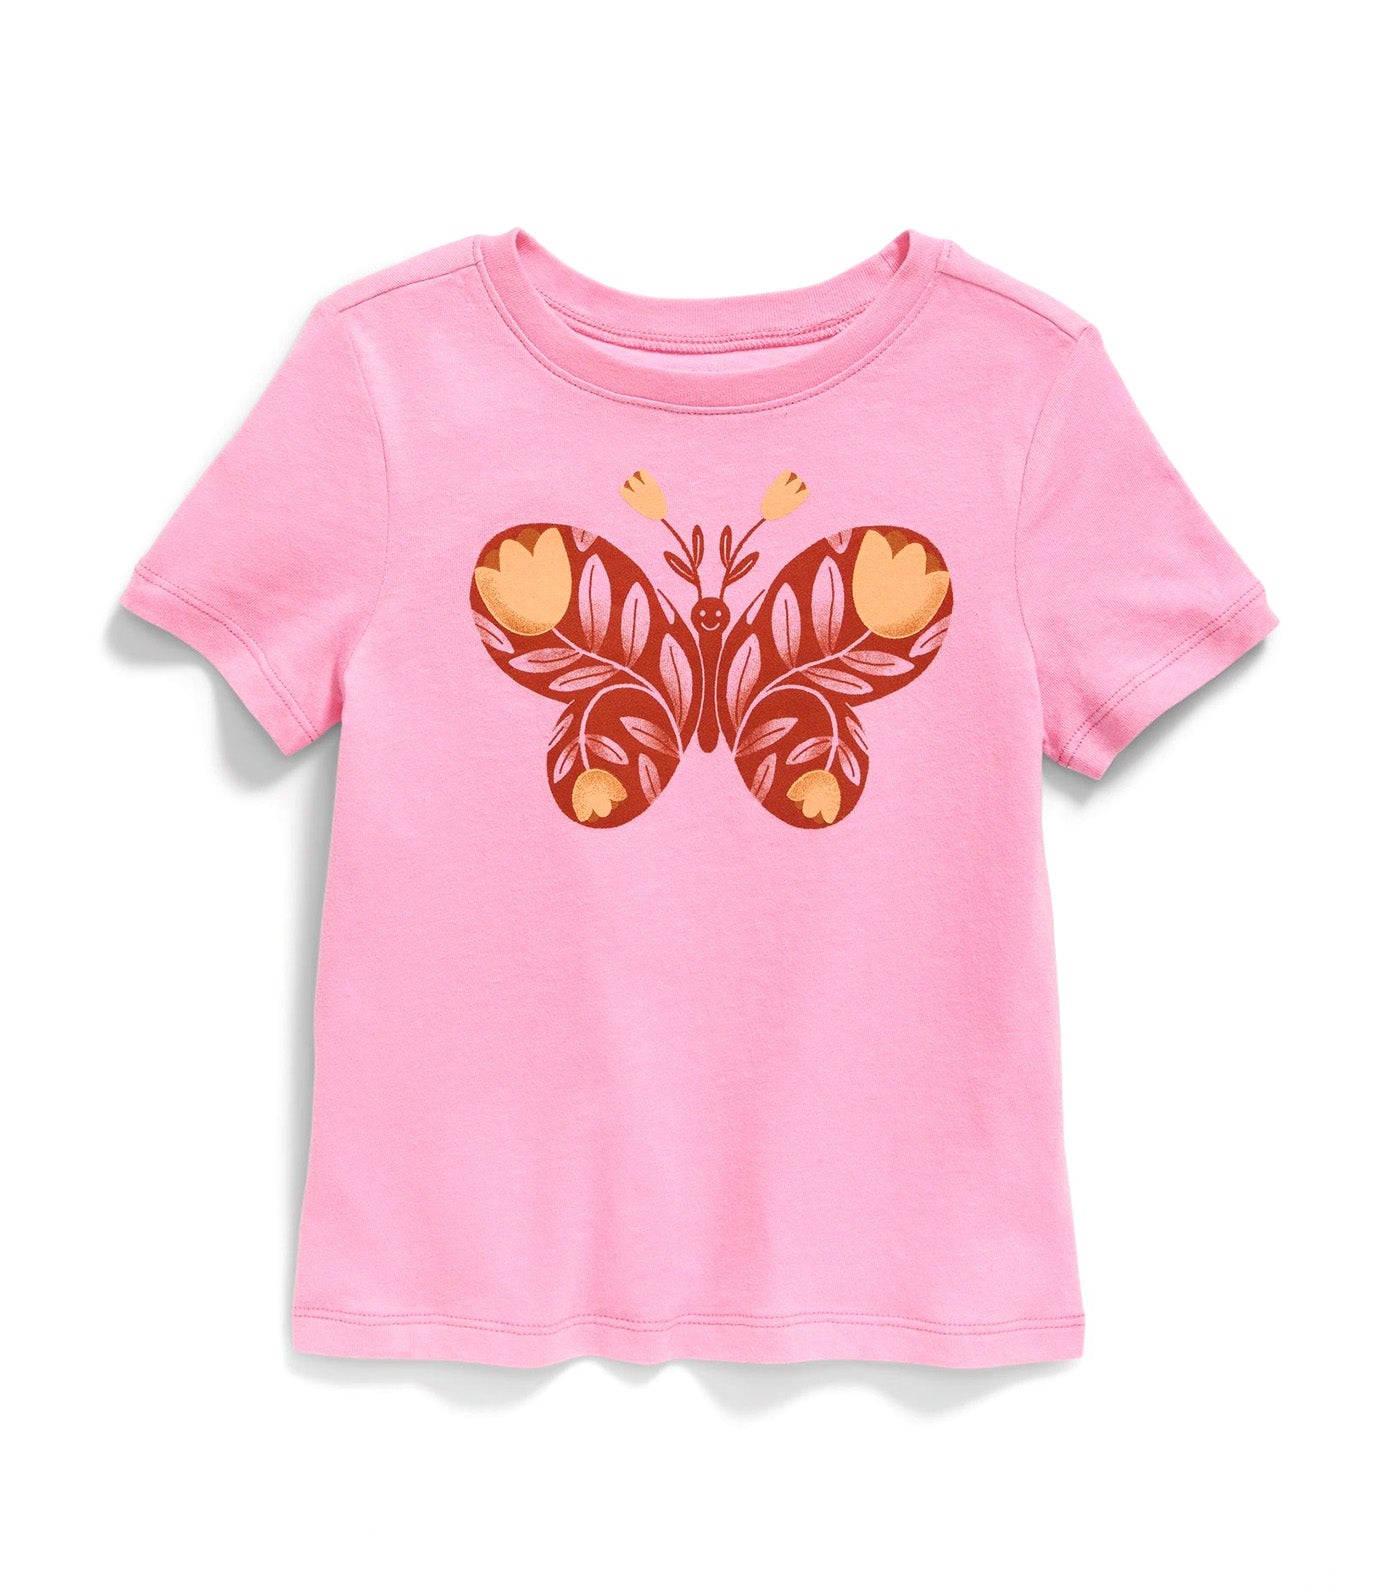 Unisex Short-Sleeve Graphic T-Shirt for Toddler Pink Edge Neon Poly